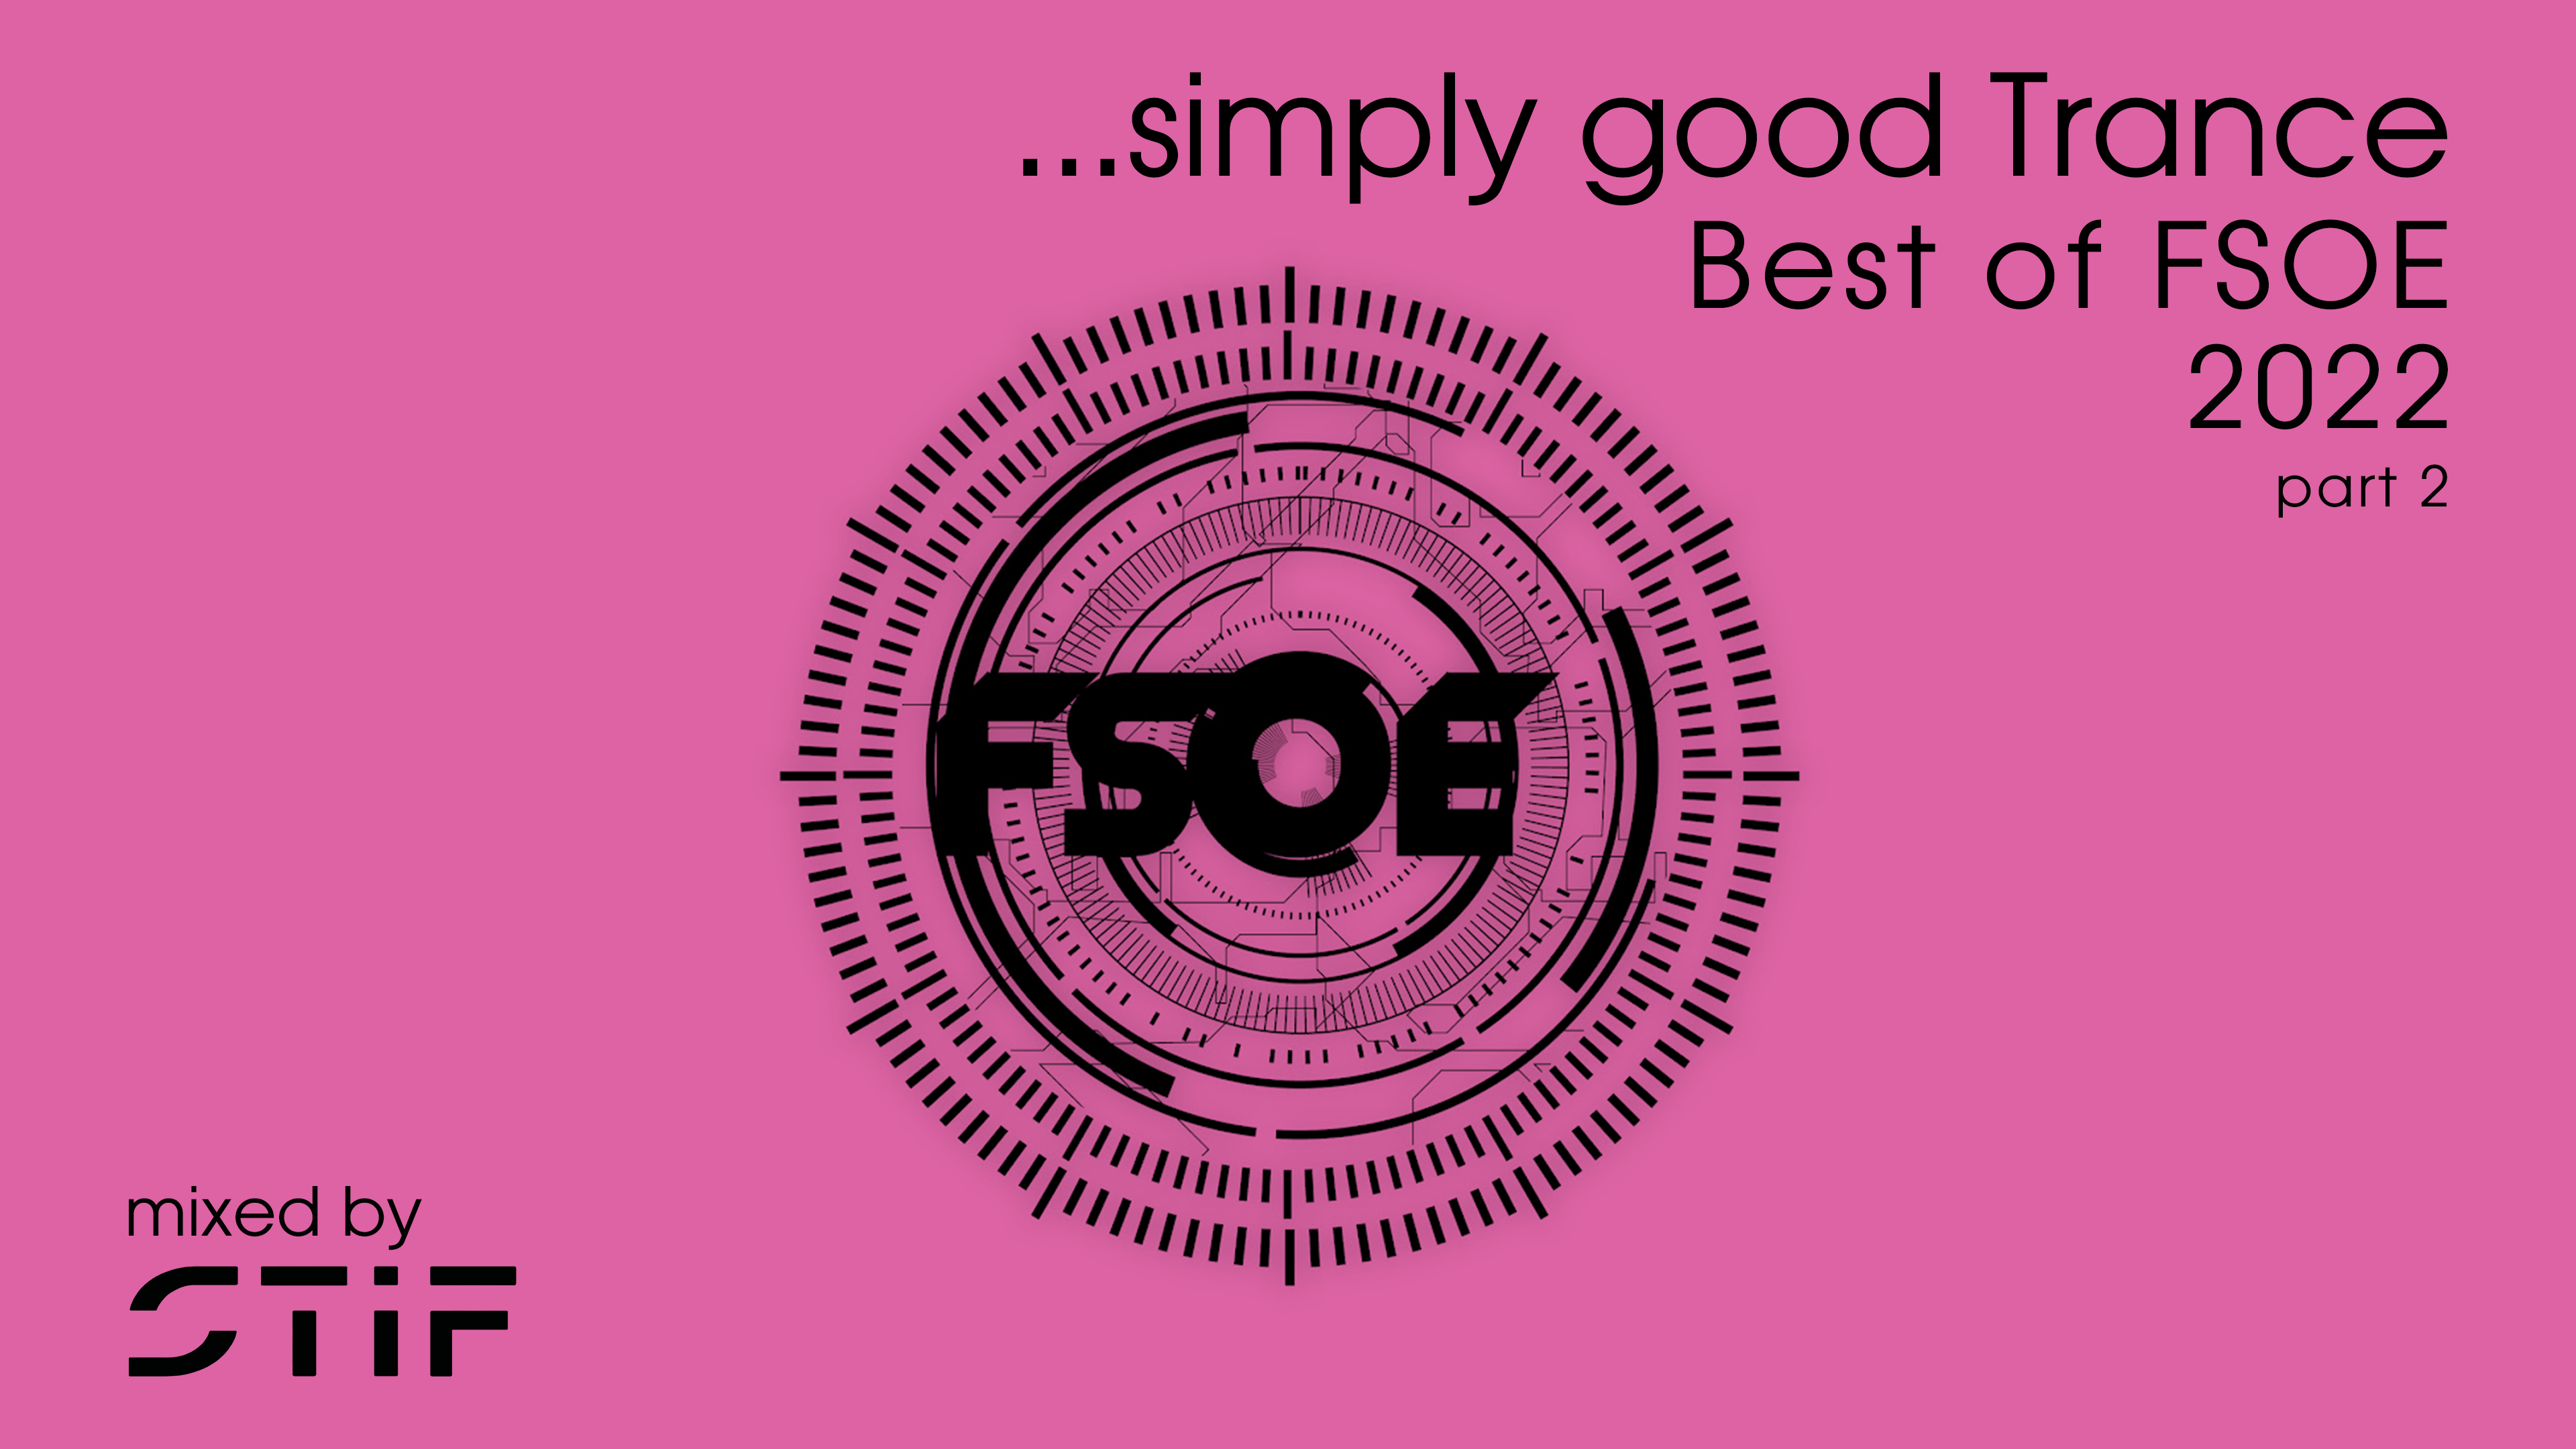 ...simply good Trance - Best of FSOE 2022 (part 2) [FREE DOWNLOAD]